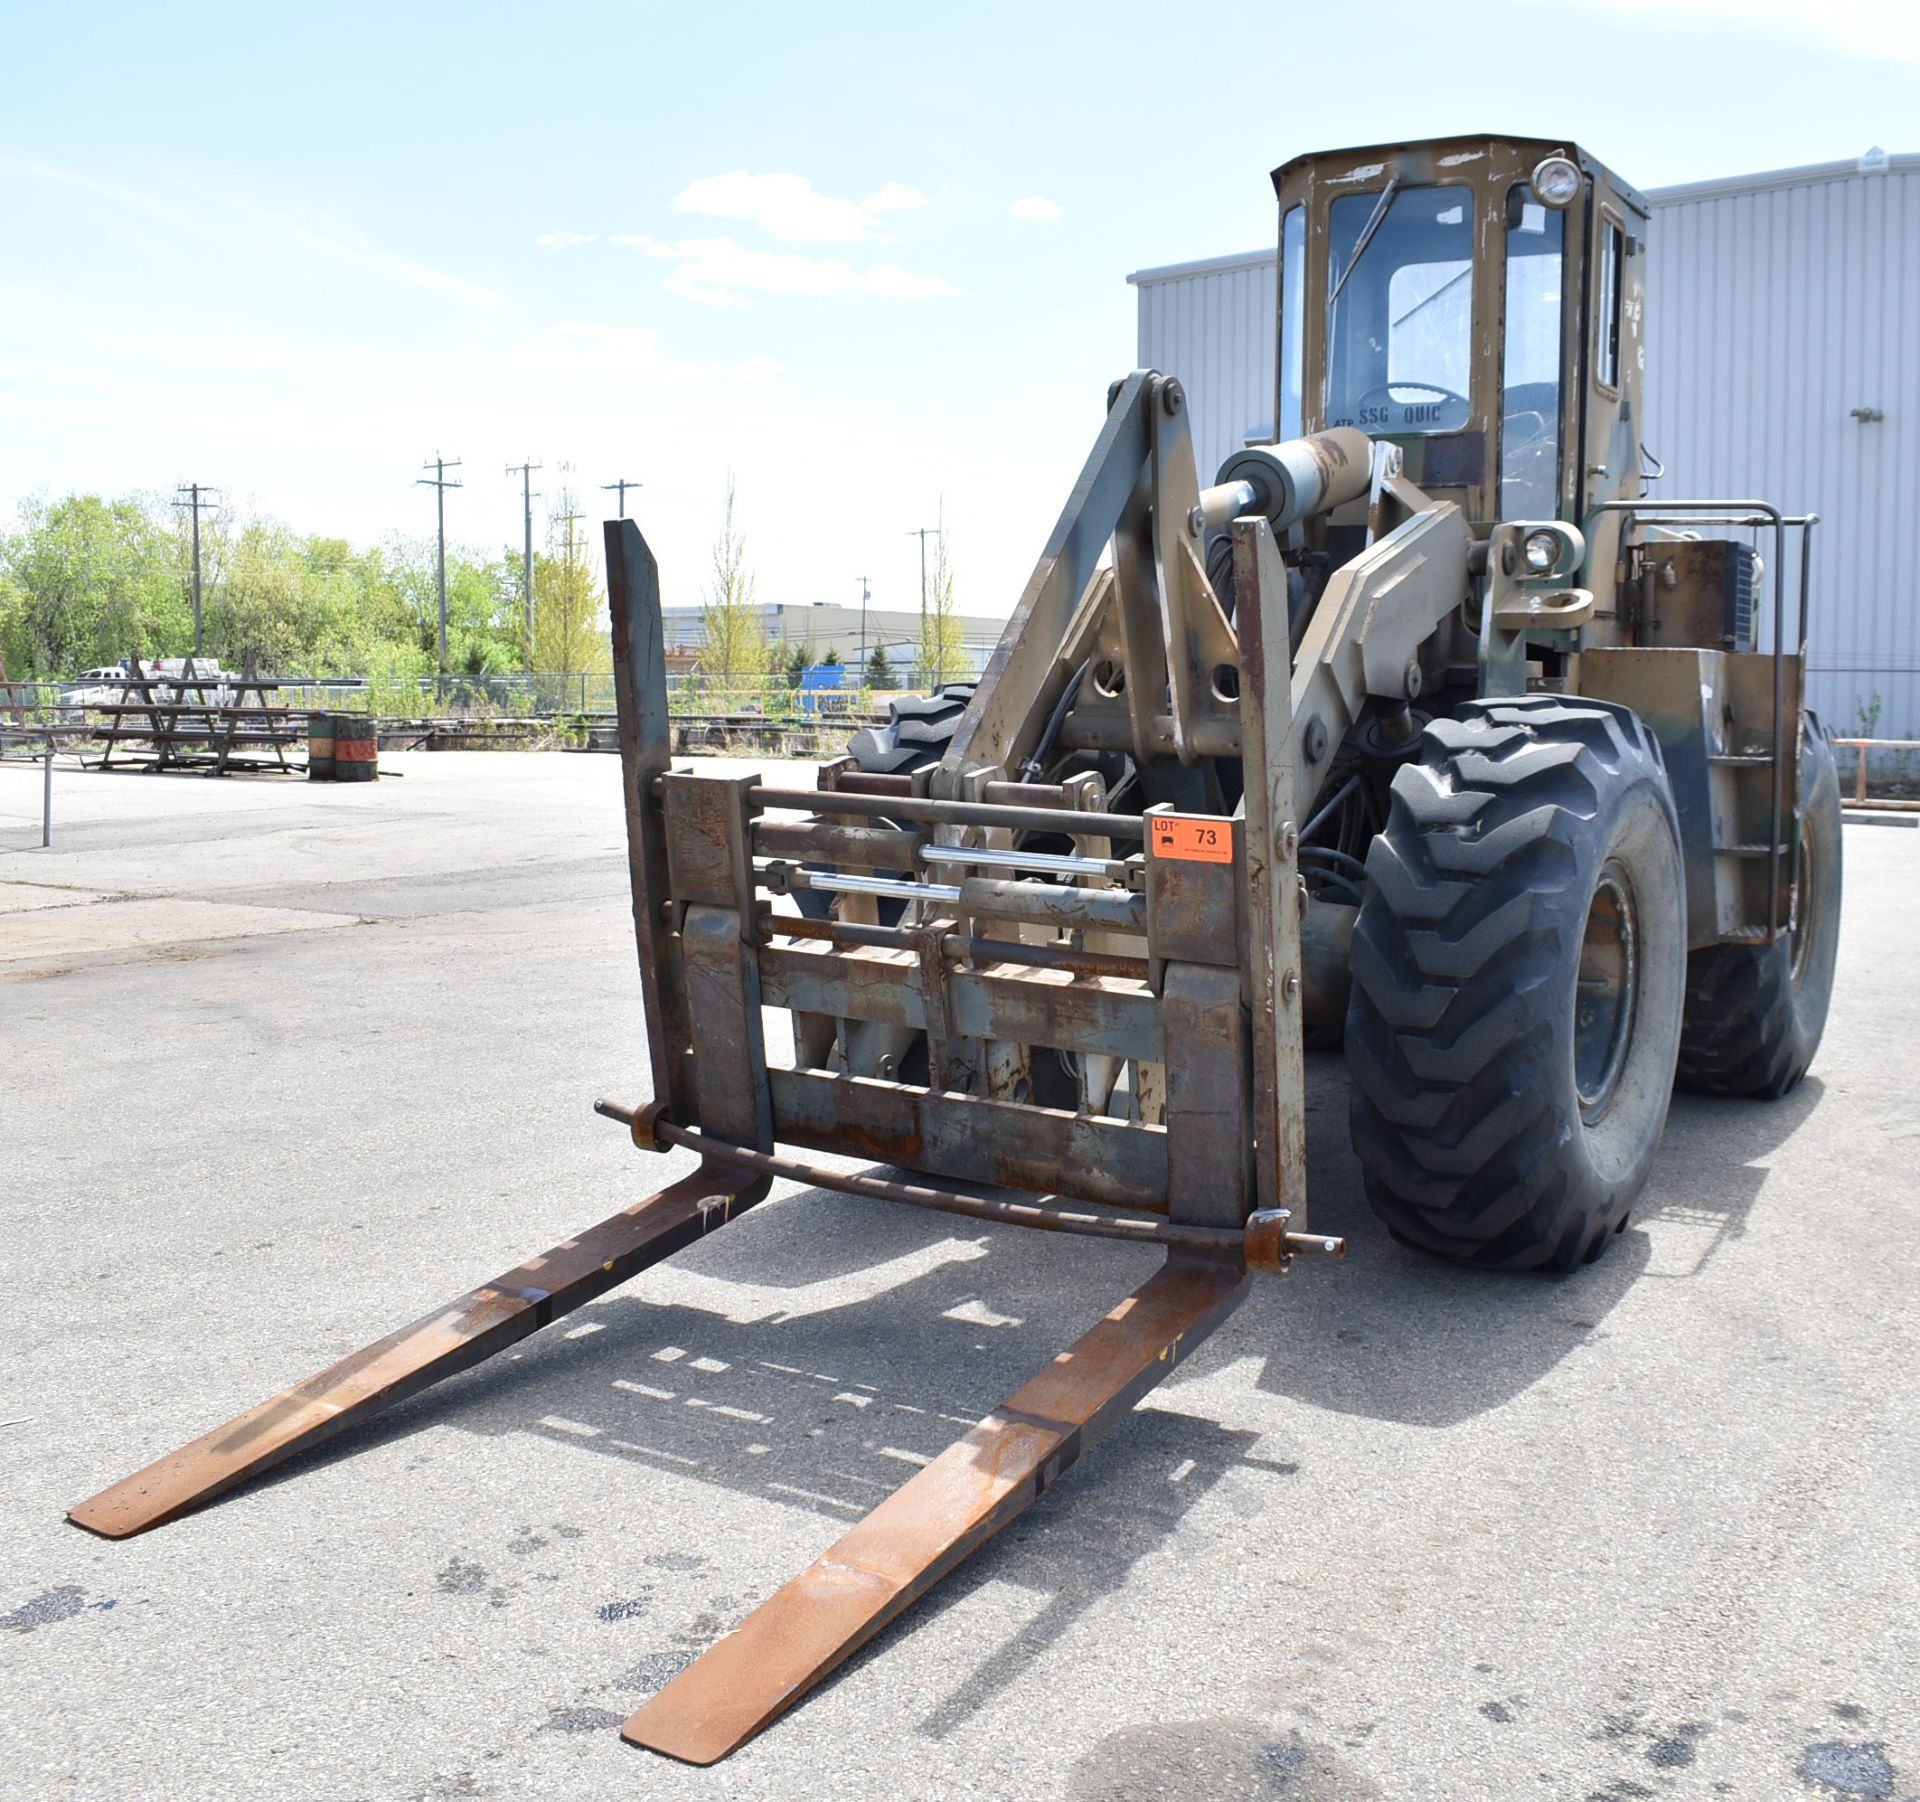 WINNDOM 201-1283 12,000LBS. CAPACITY ARTICULATING FRONT END LOADER WITH DETROIT DIESEL ENGINE,